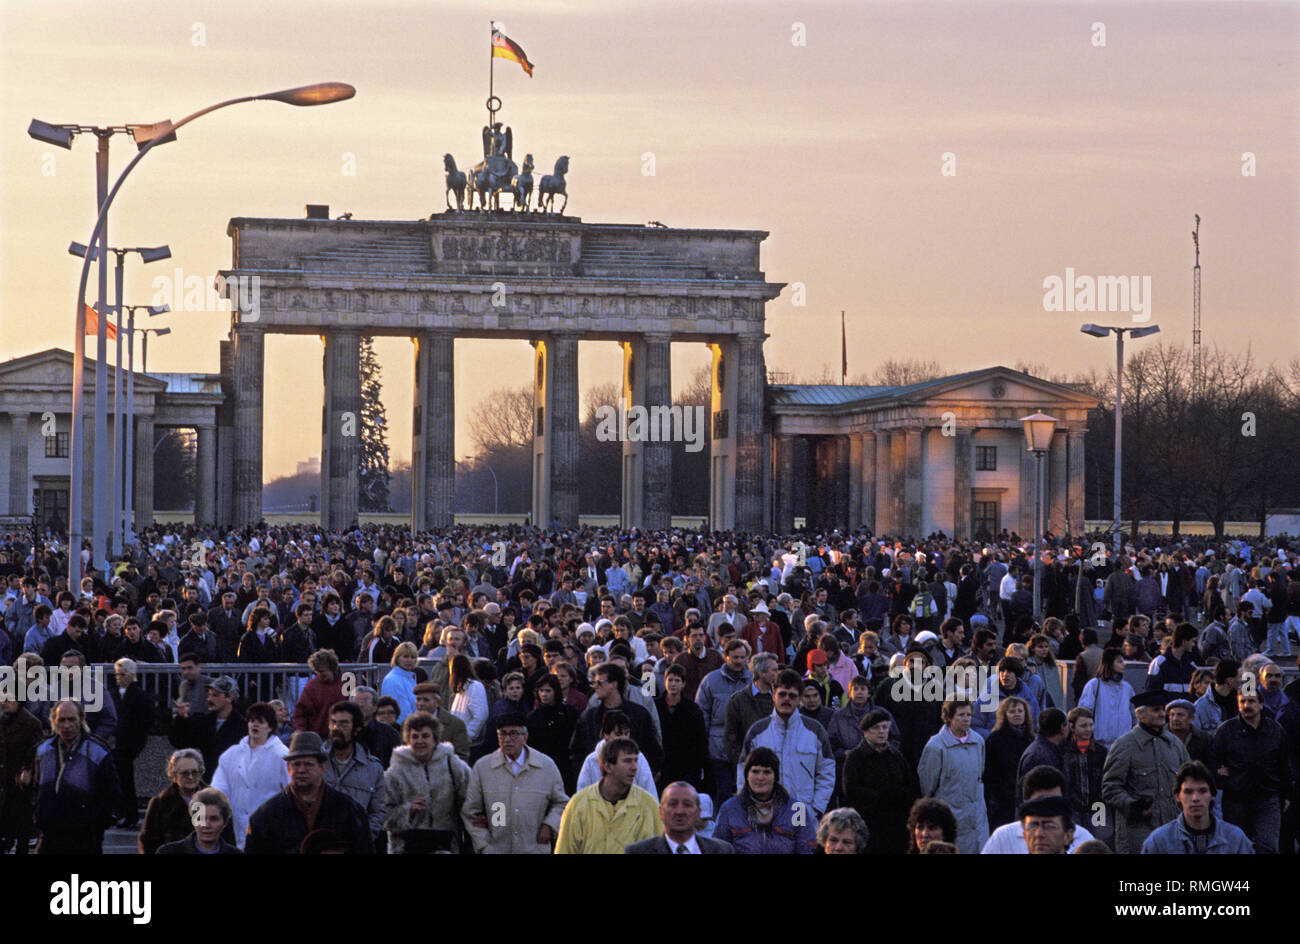 Visa-free tourist traffic for residents of West Germany becomes possible between the GDR and the FRG after long negotiations on December 24, 1989. The minimum obligatory exchange at the border was also dropped. Thousands of people from Berlin and visitors take advantage of the new regulation for a Christmas trip to the Brandenburg Gate. The Pariser Platz has become accessible to the public for the first time since the Wall was built. Stock Photo